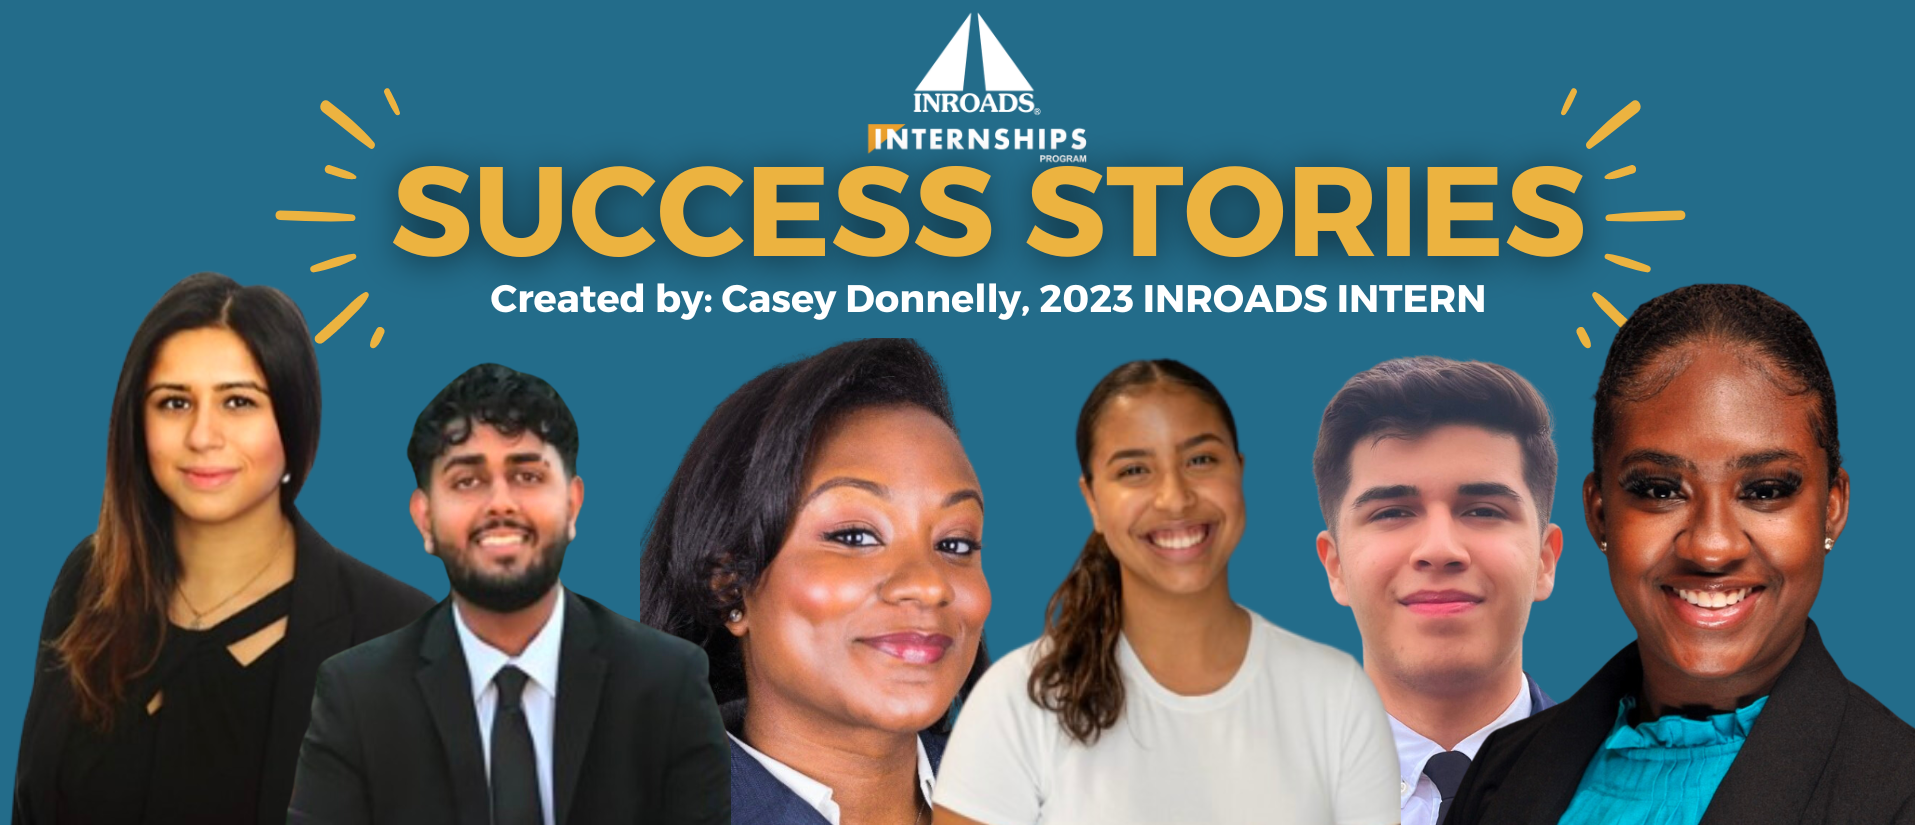 Featured image for “INROADS SUCCESS STORIES”